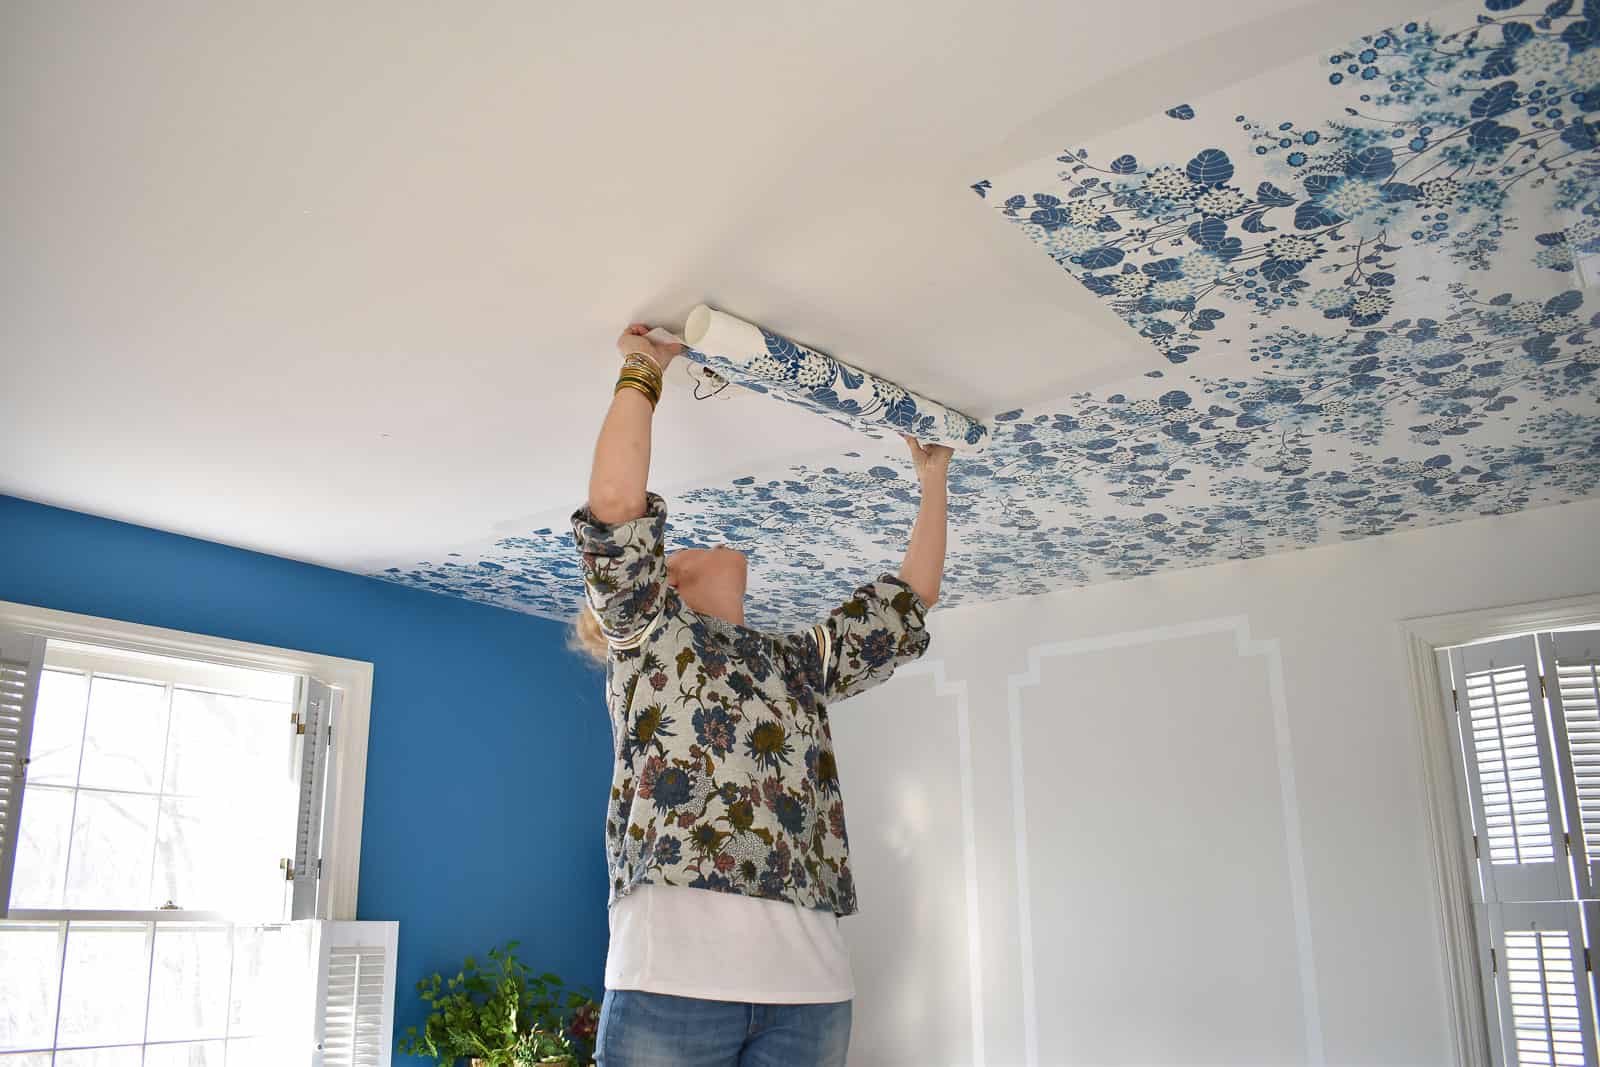 How to Make Your Own Rent Friendly Removable Wallpaper - At Charlotte's  House